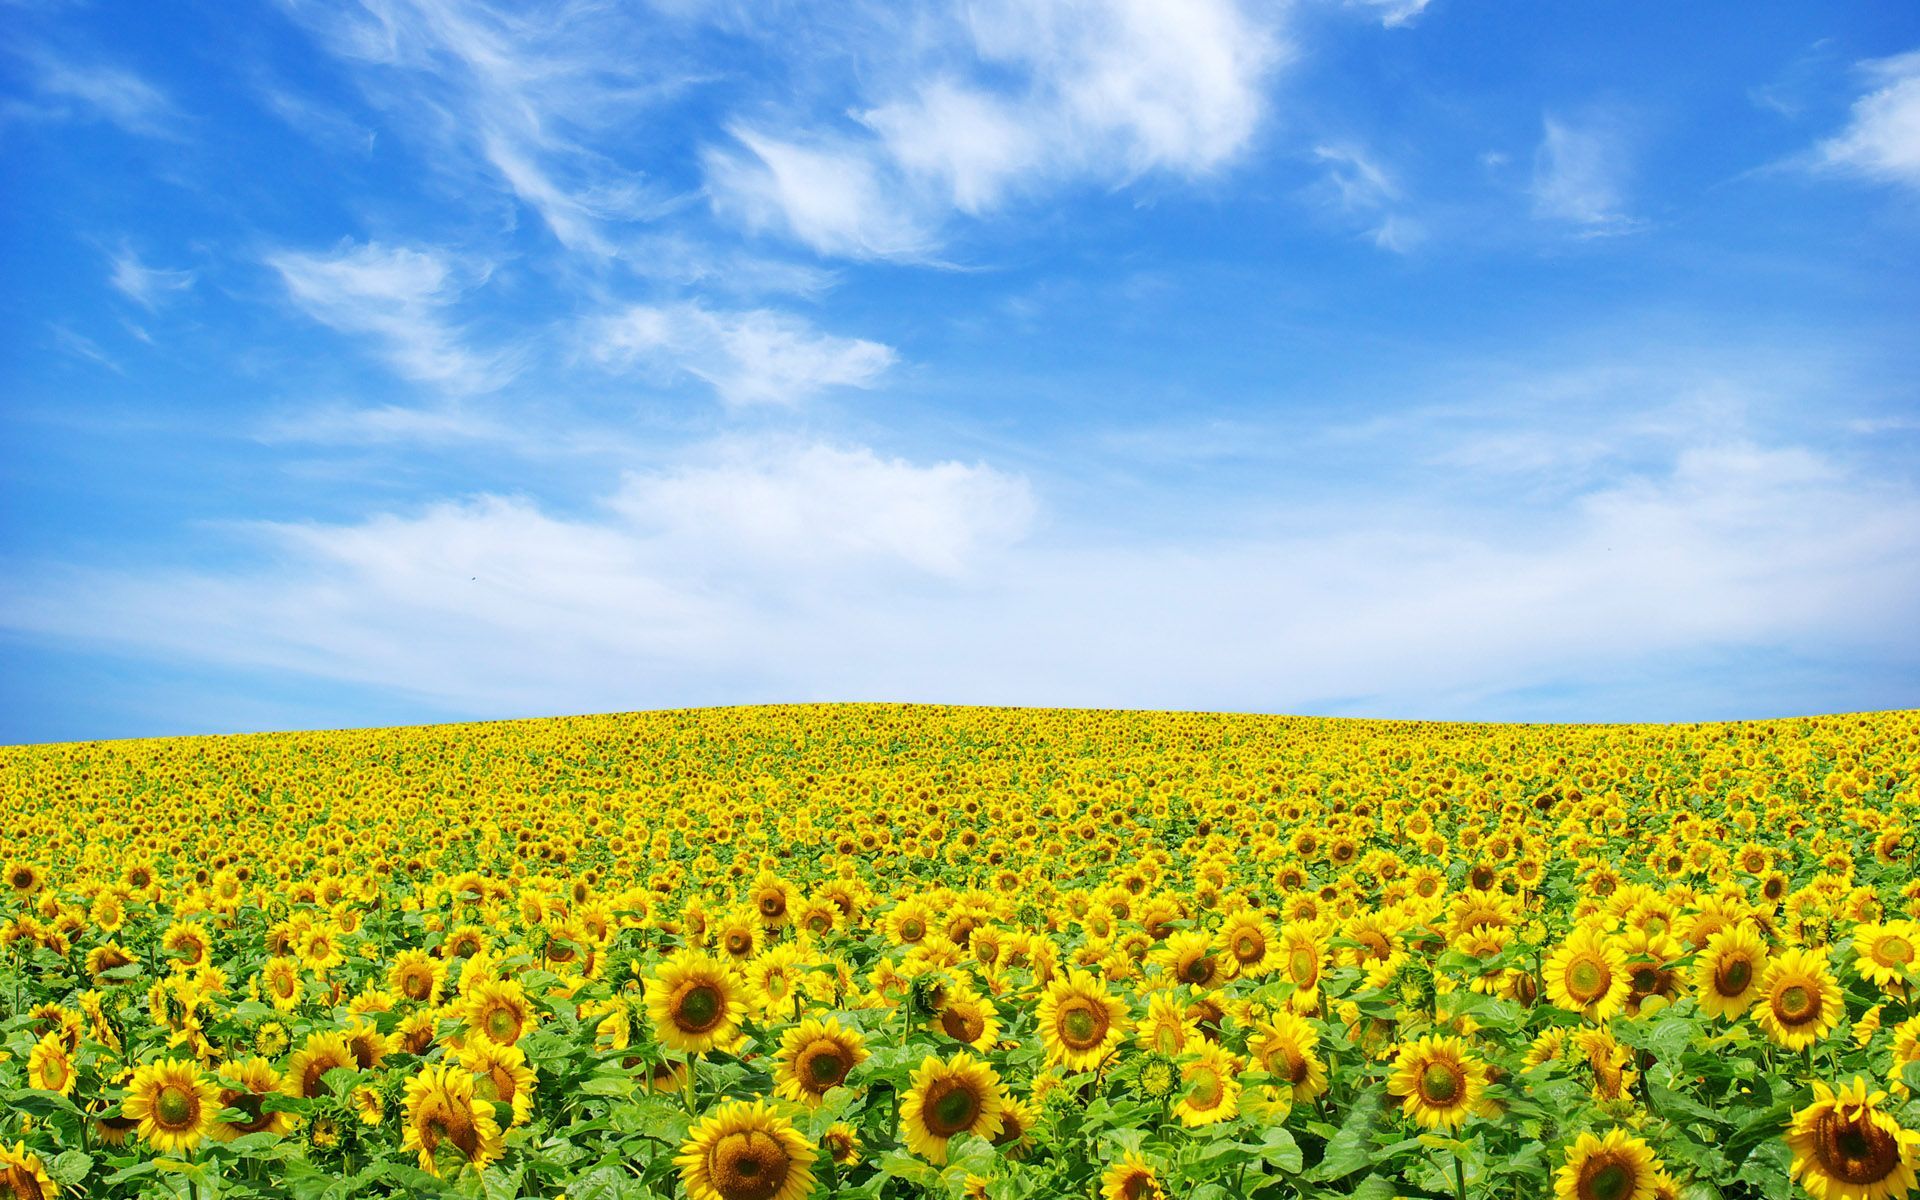 Wallpapers Tagged With SUNFLOWER SUNFLOWER HD Wallpapers